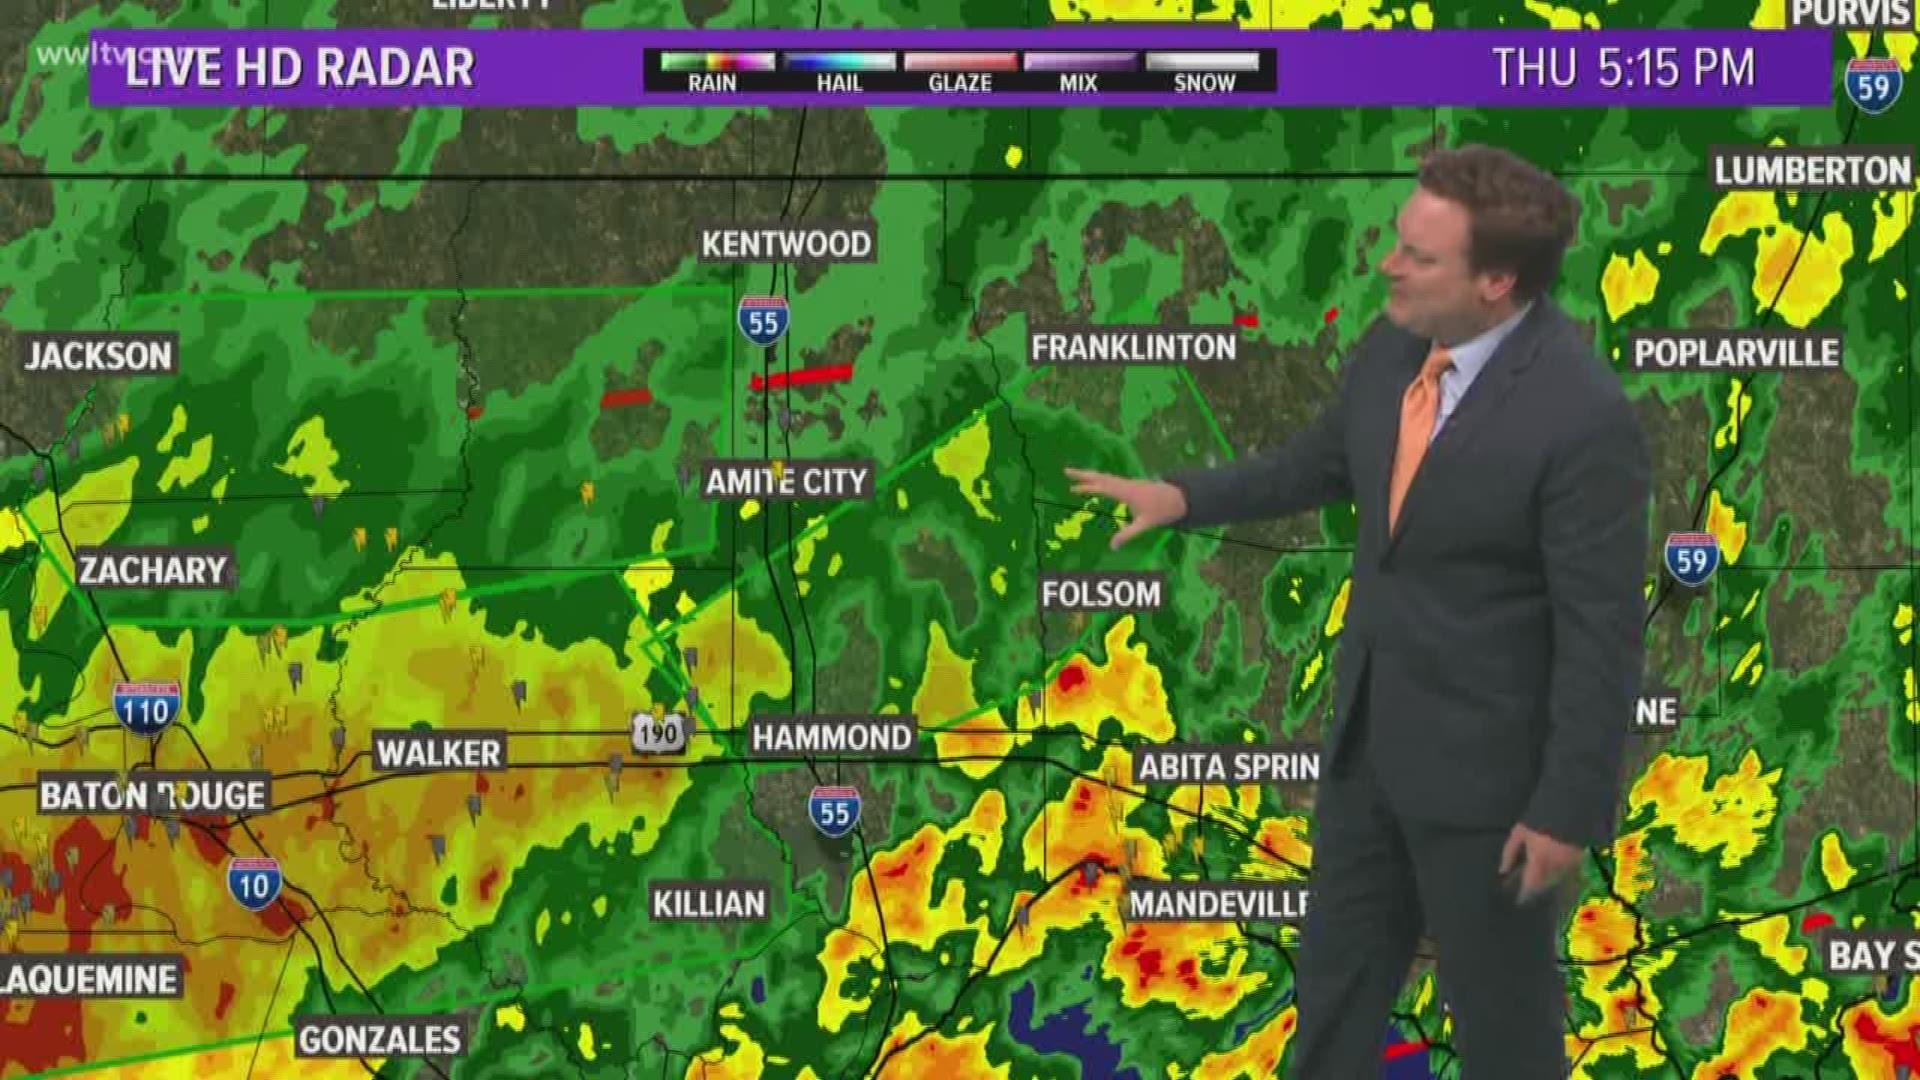 Heavy rain is expected to continue through Easter Sunday - off and on.